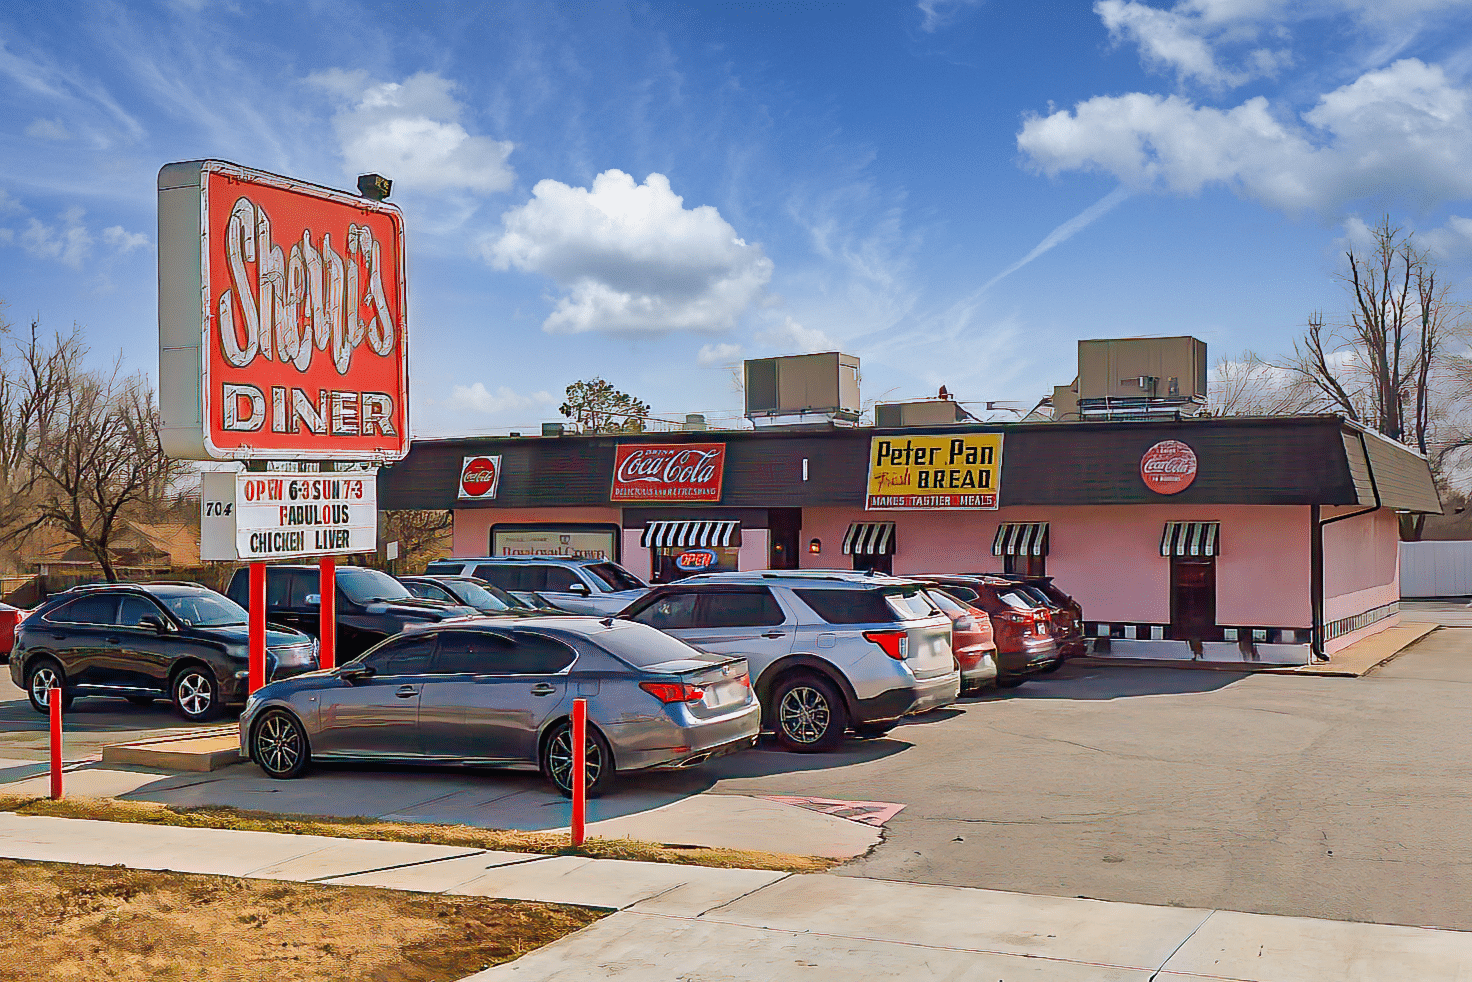 a parking lot with cars parked in front of Sherri's Diner.